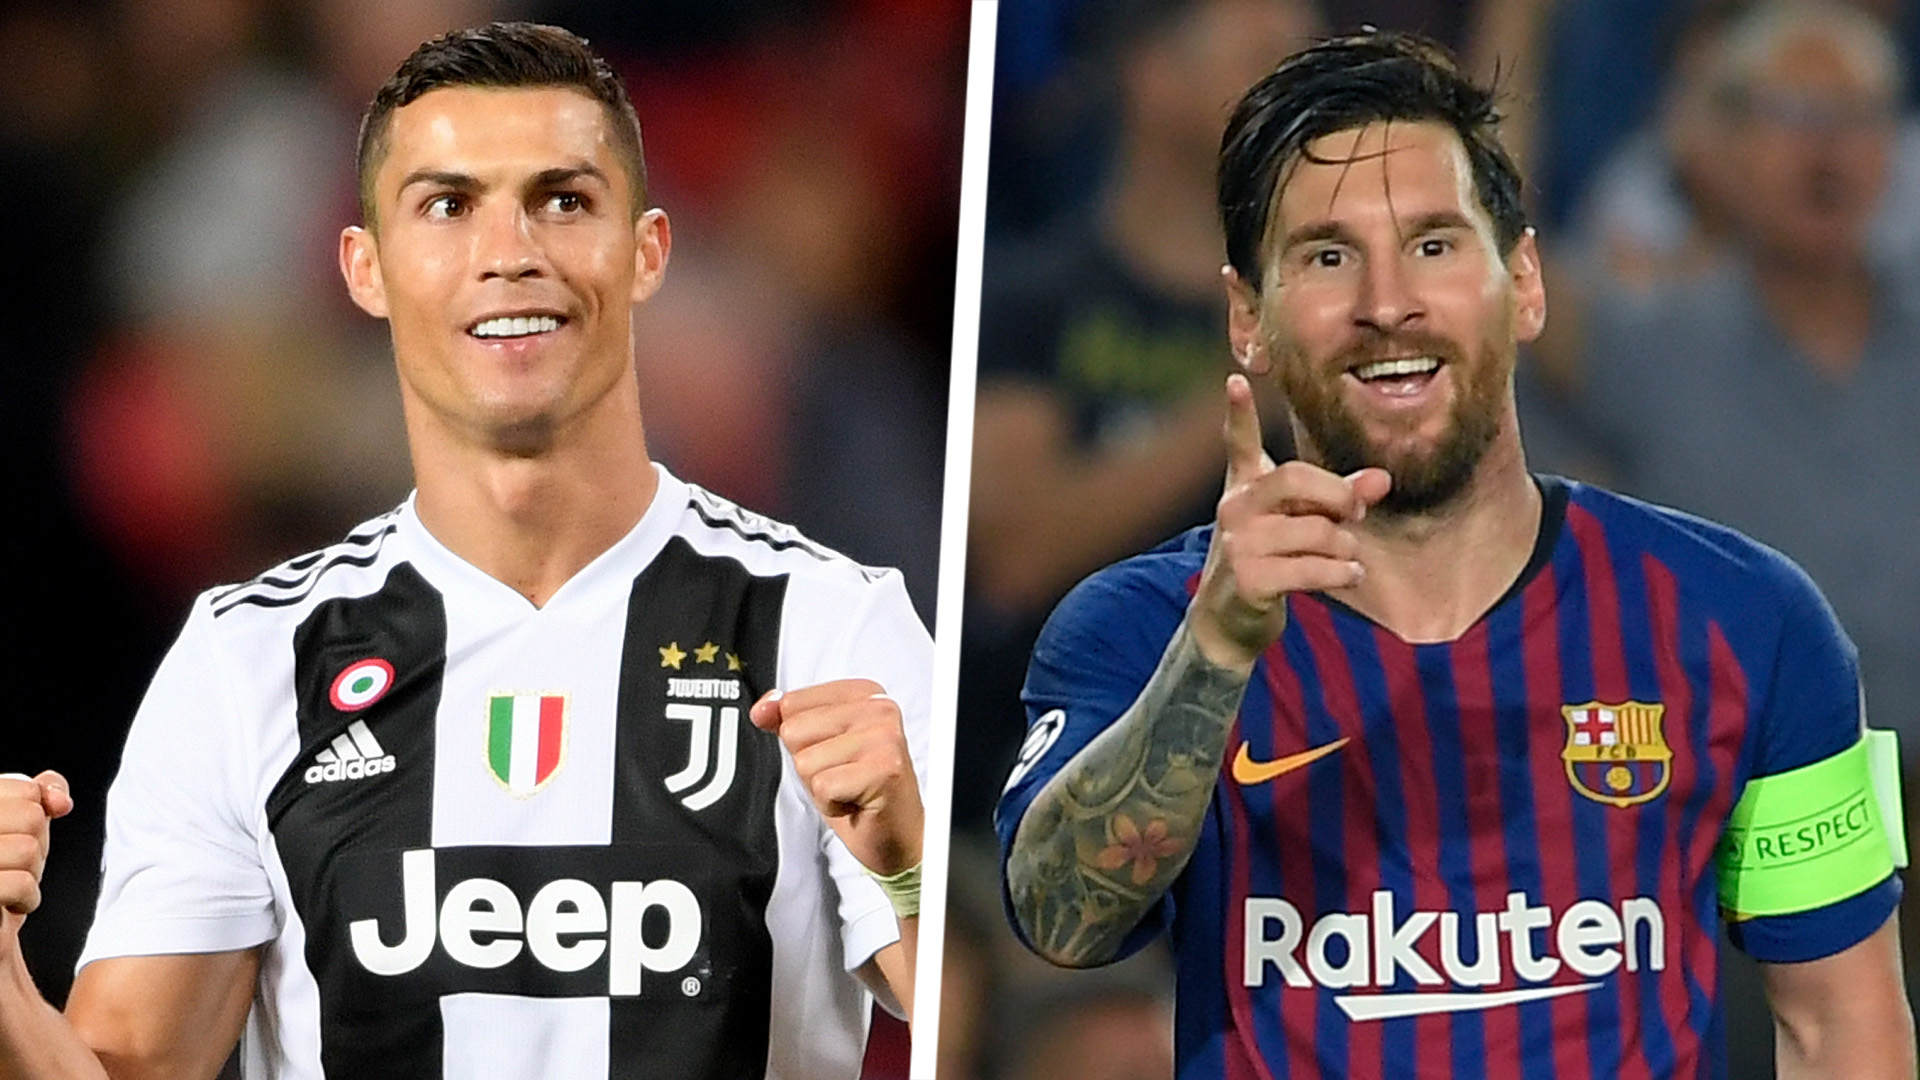 Messi finally responds to accepting Ronaldo’s challenge